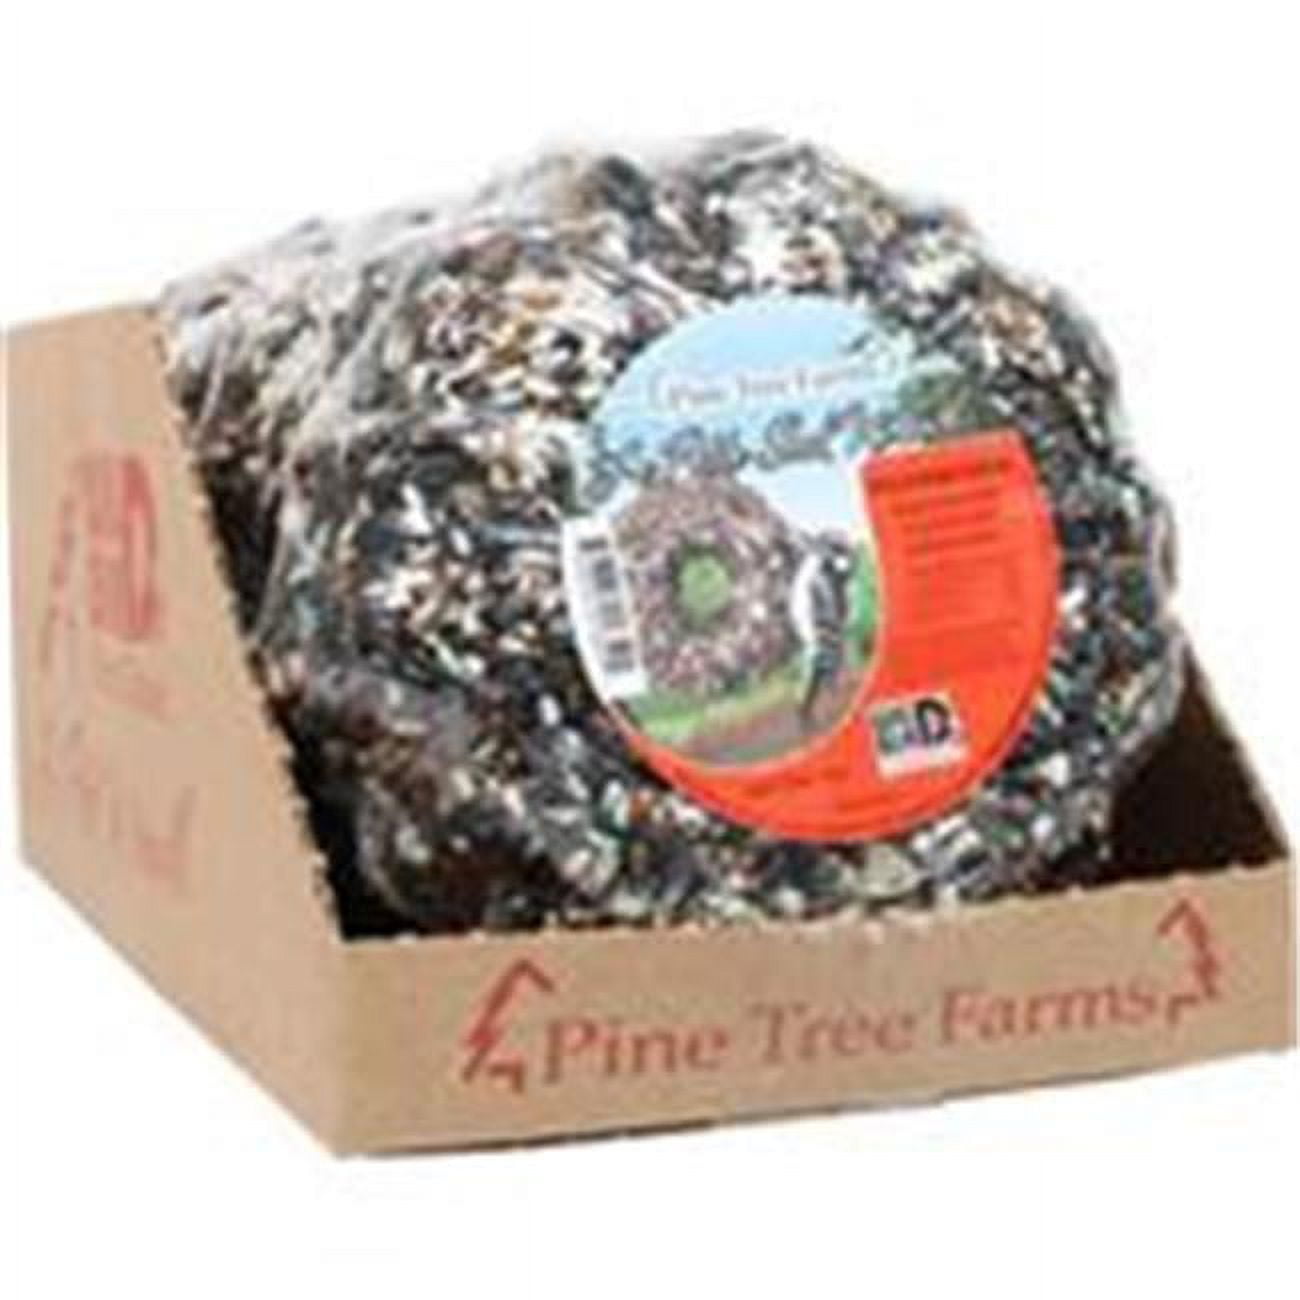 Picture of Pine Tree Farms 399636 1.25 lbs LE Petite Seed Wreath Counter Pack, Black